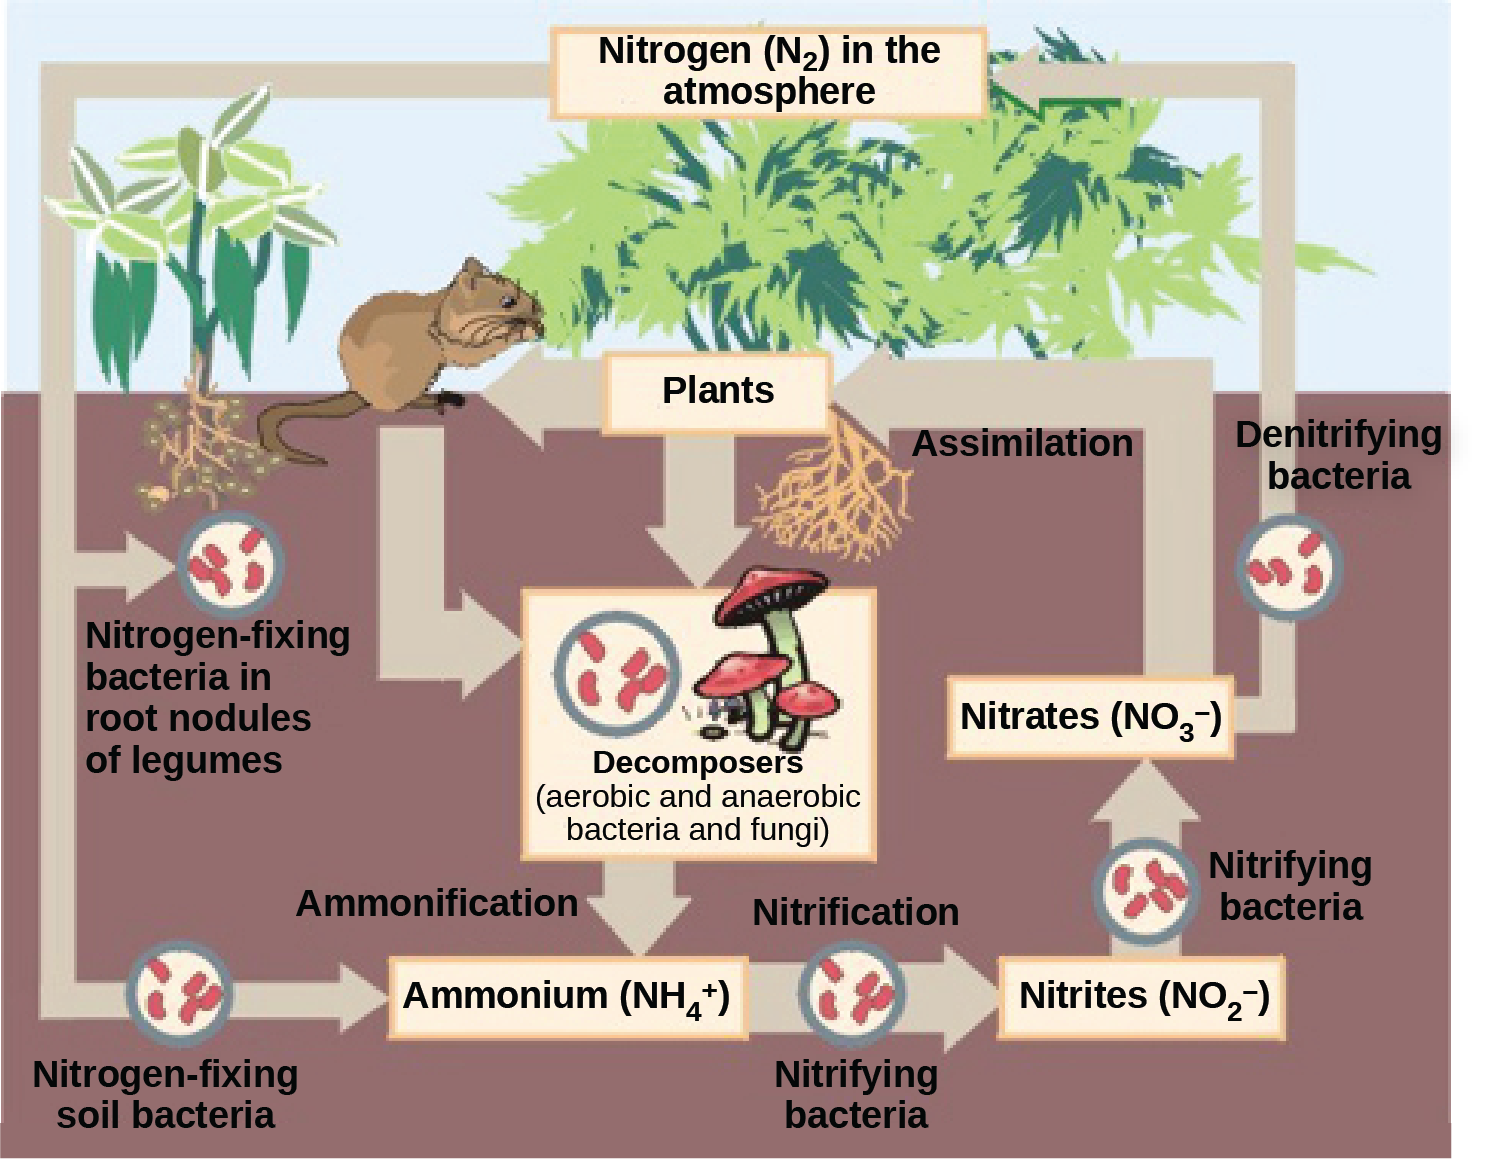 This illustration shows the role of bacteria in the nitrogen cycle. Nitrogen-fixing bacteria in root nodules of legumes convert nitrogen gas, or upper case N 2, into organic nitrogen found in plants. Nitrogen-fixing soil bacteria produce ammonium ion, or upper N upper H 4 plus sign. Decomposers, including bacteria and fungi, decompose organic matter, also releasing upper N upper H 4 plus sign. Nitrification is the process by which nitrifying bacteria produce nitrites, shown as upper N upper O 2 negative, and nitrates, shown as upper N upper O 3 negative. Nitrates are assimilated by plants, then animals, then decomposers. Denitrifying bacteria convert nitrates to nitrogen gas, completing the cycle.